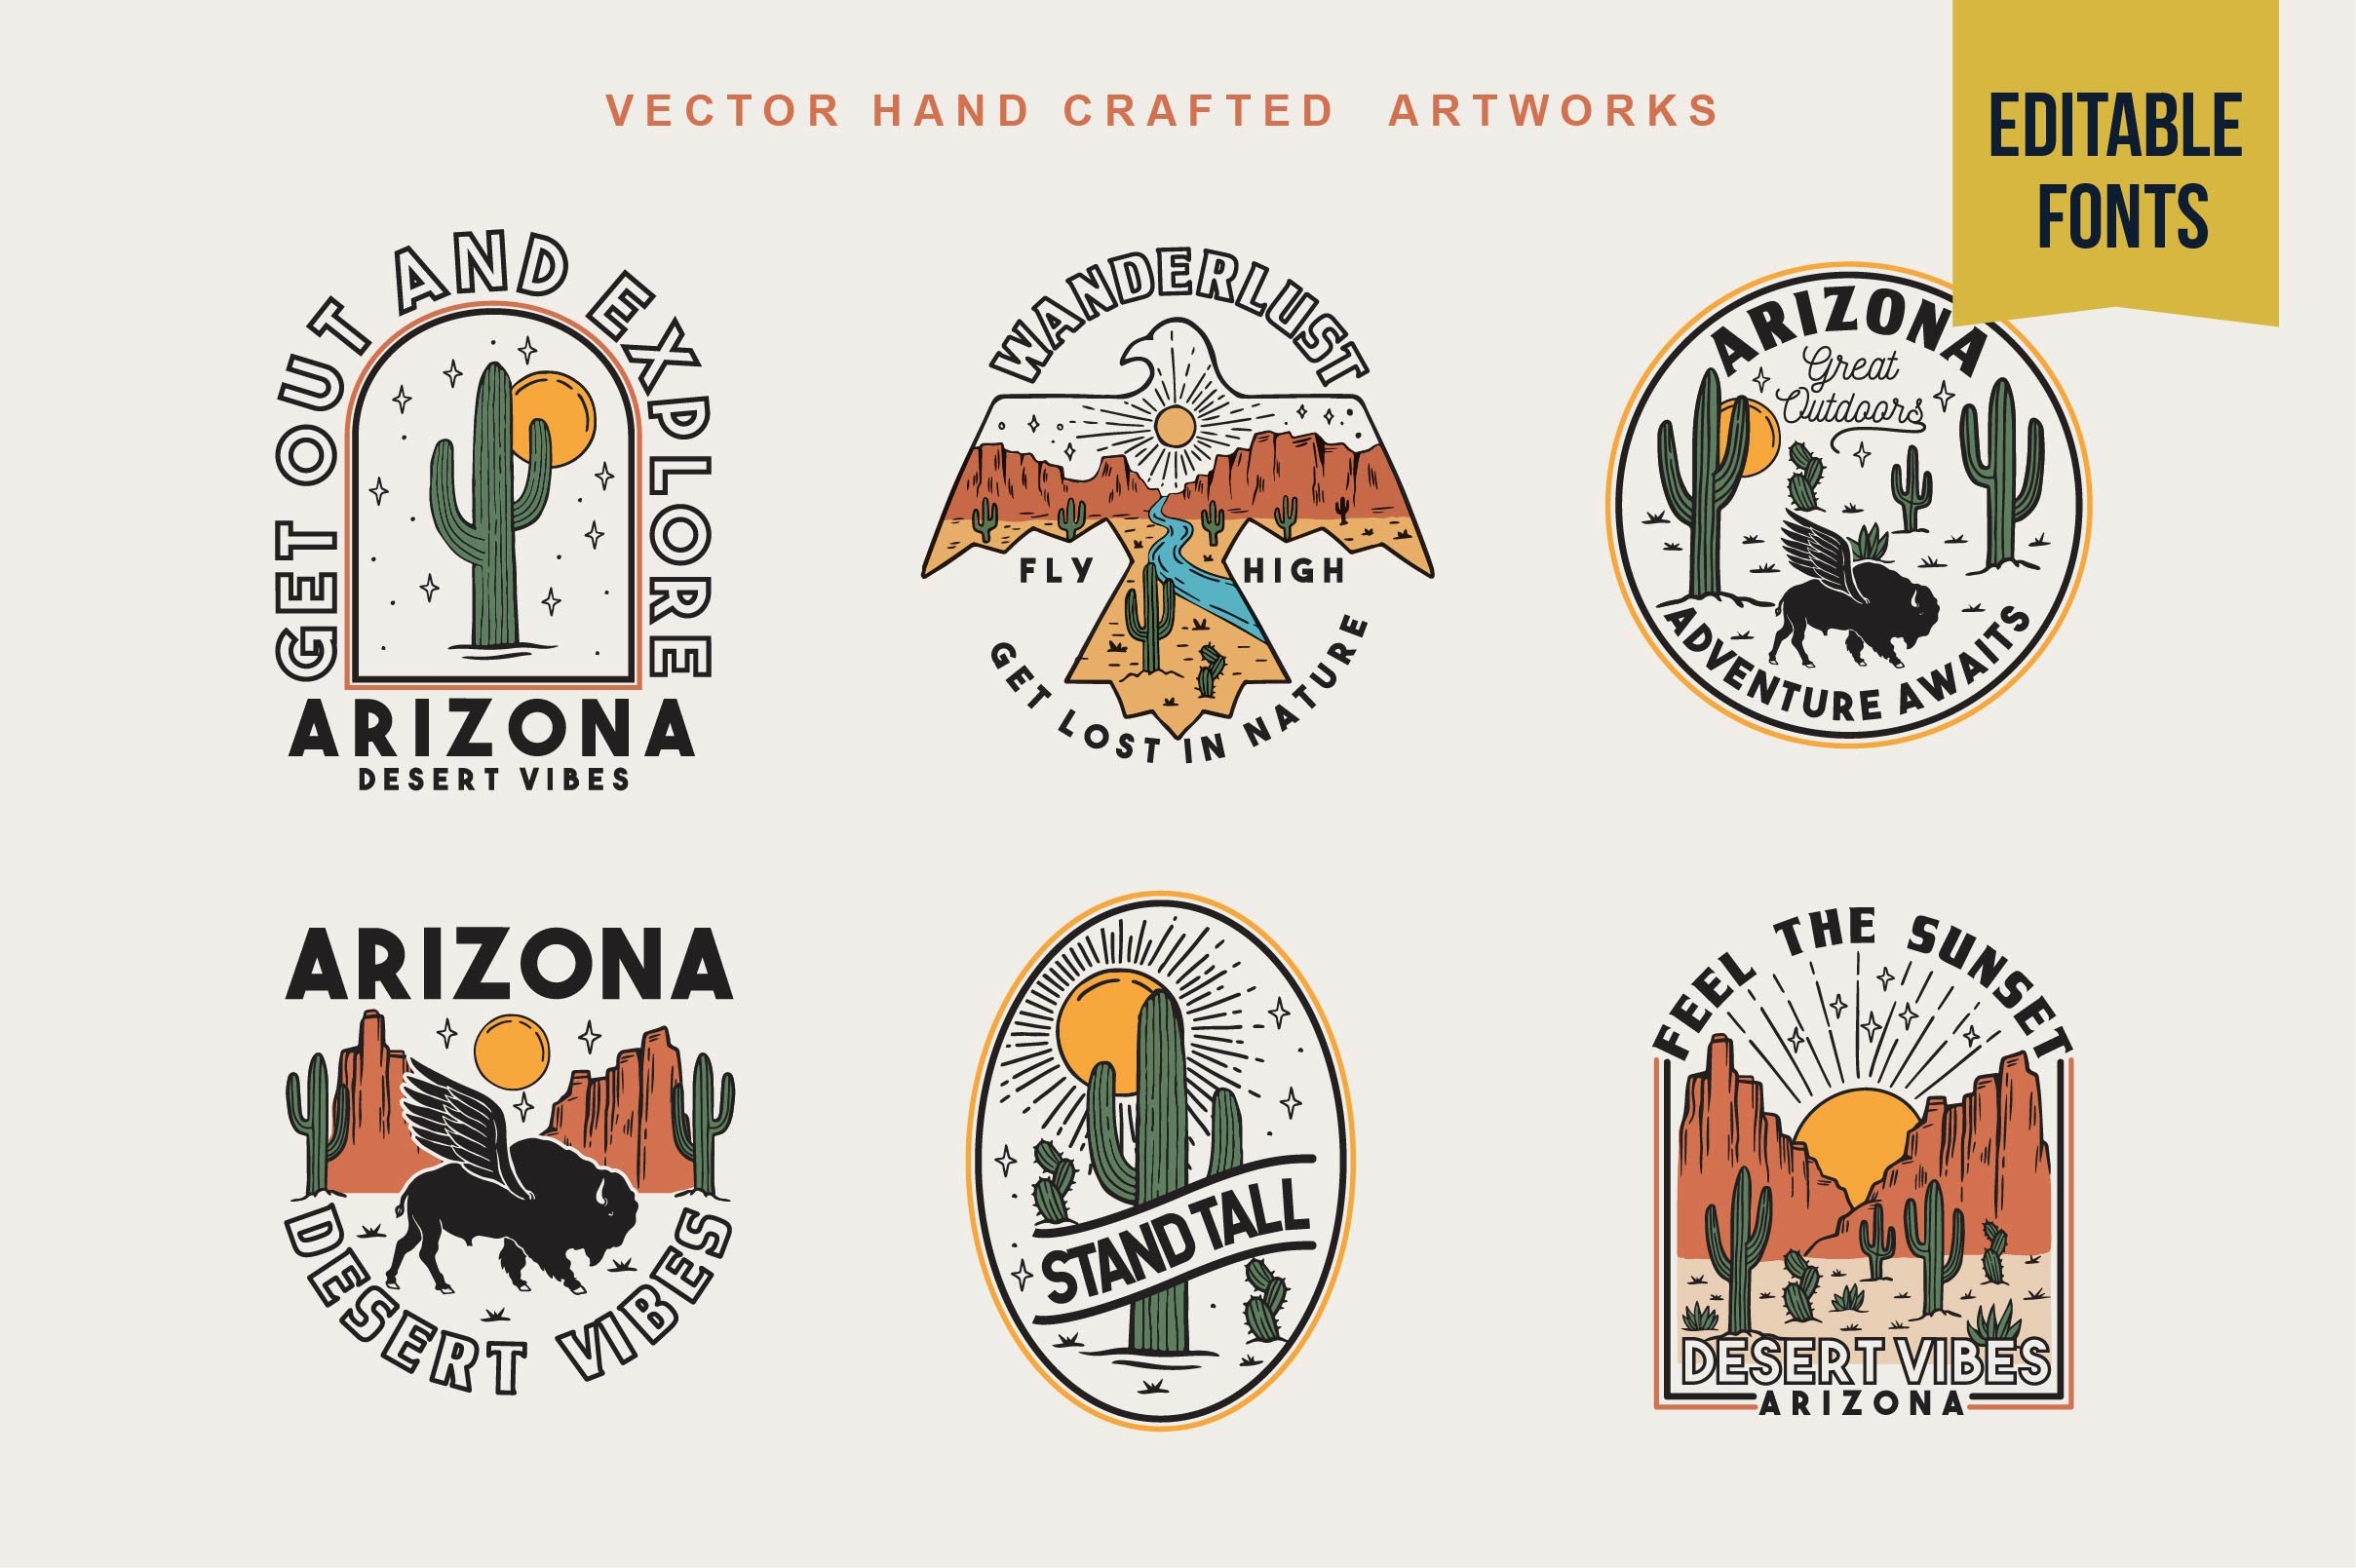 Vector hand crafted artworks.